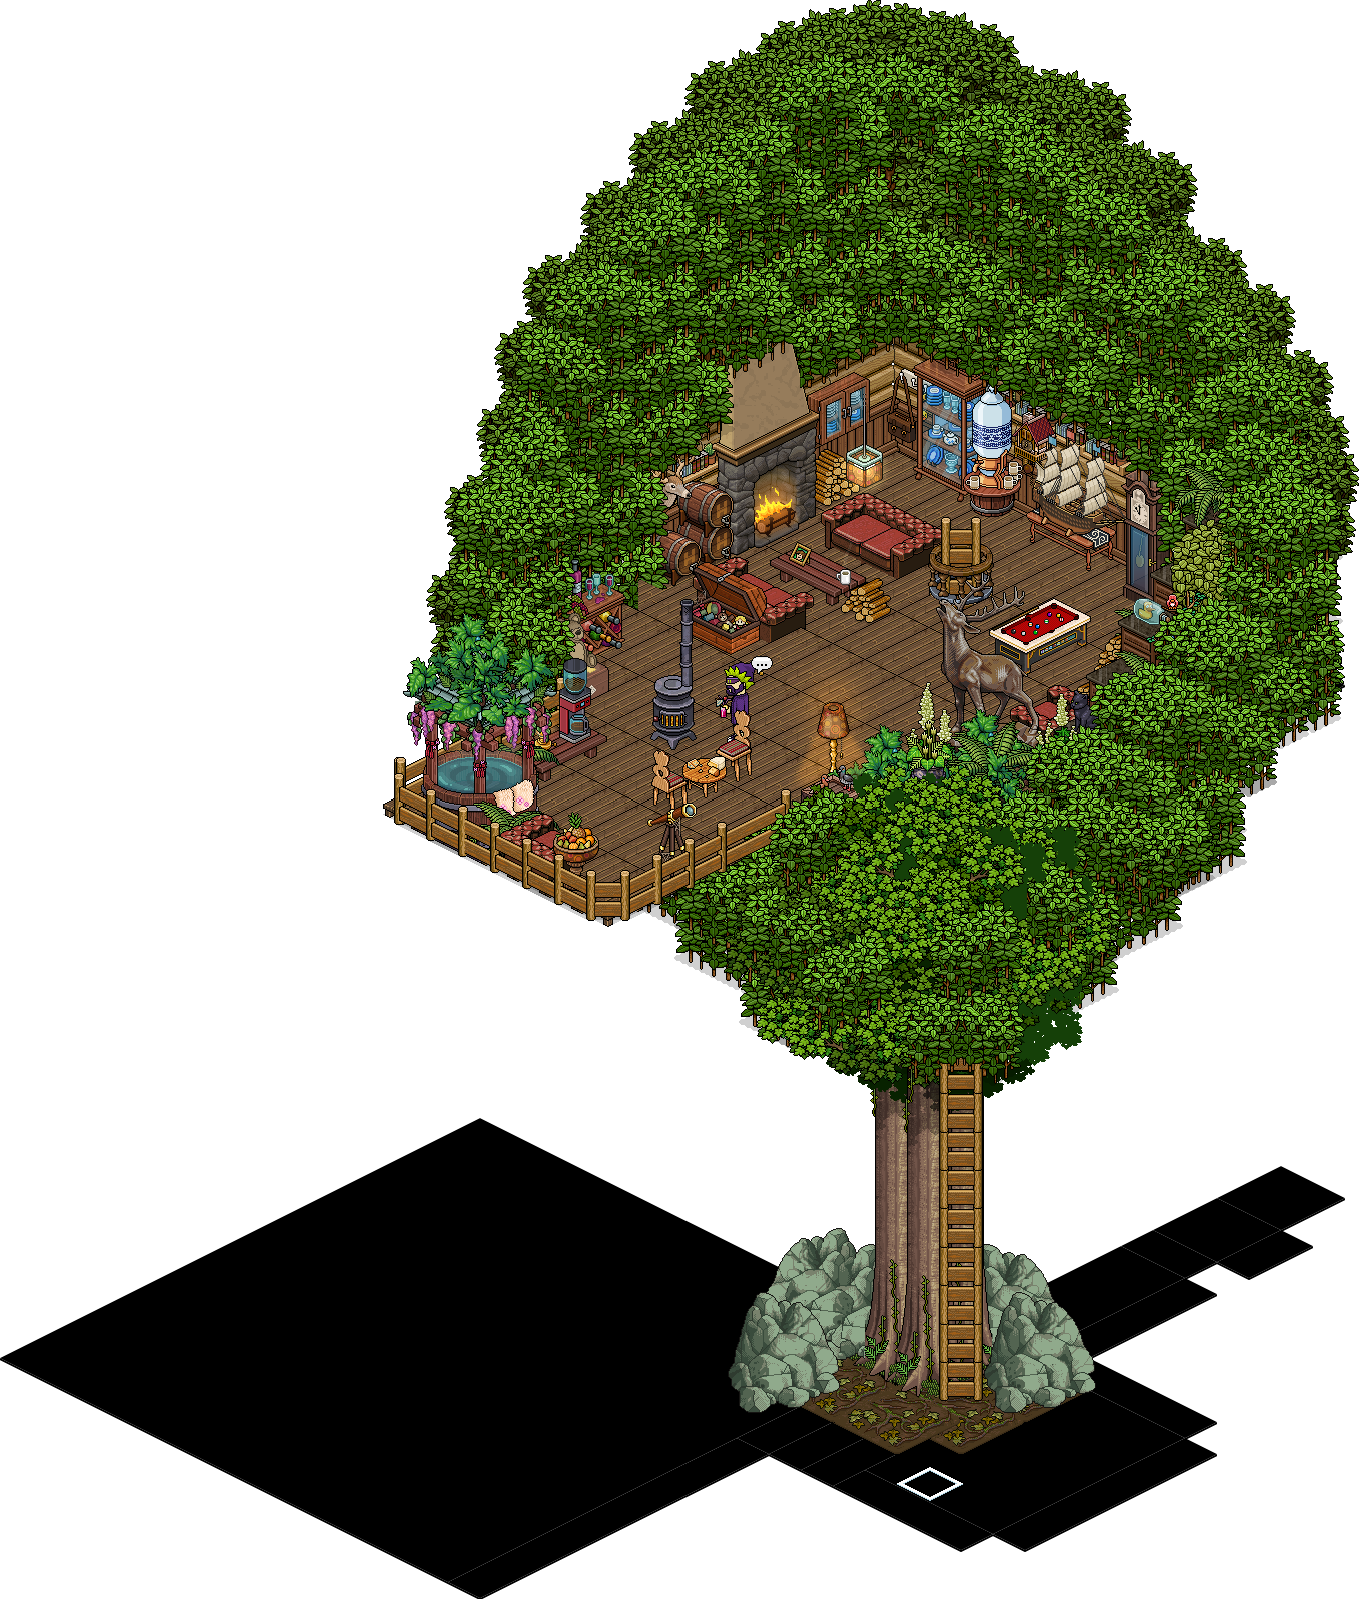 Habbo Sulake Tree House Free HQ Image Clipart